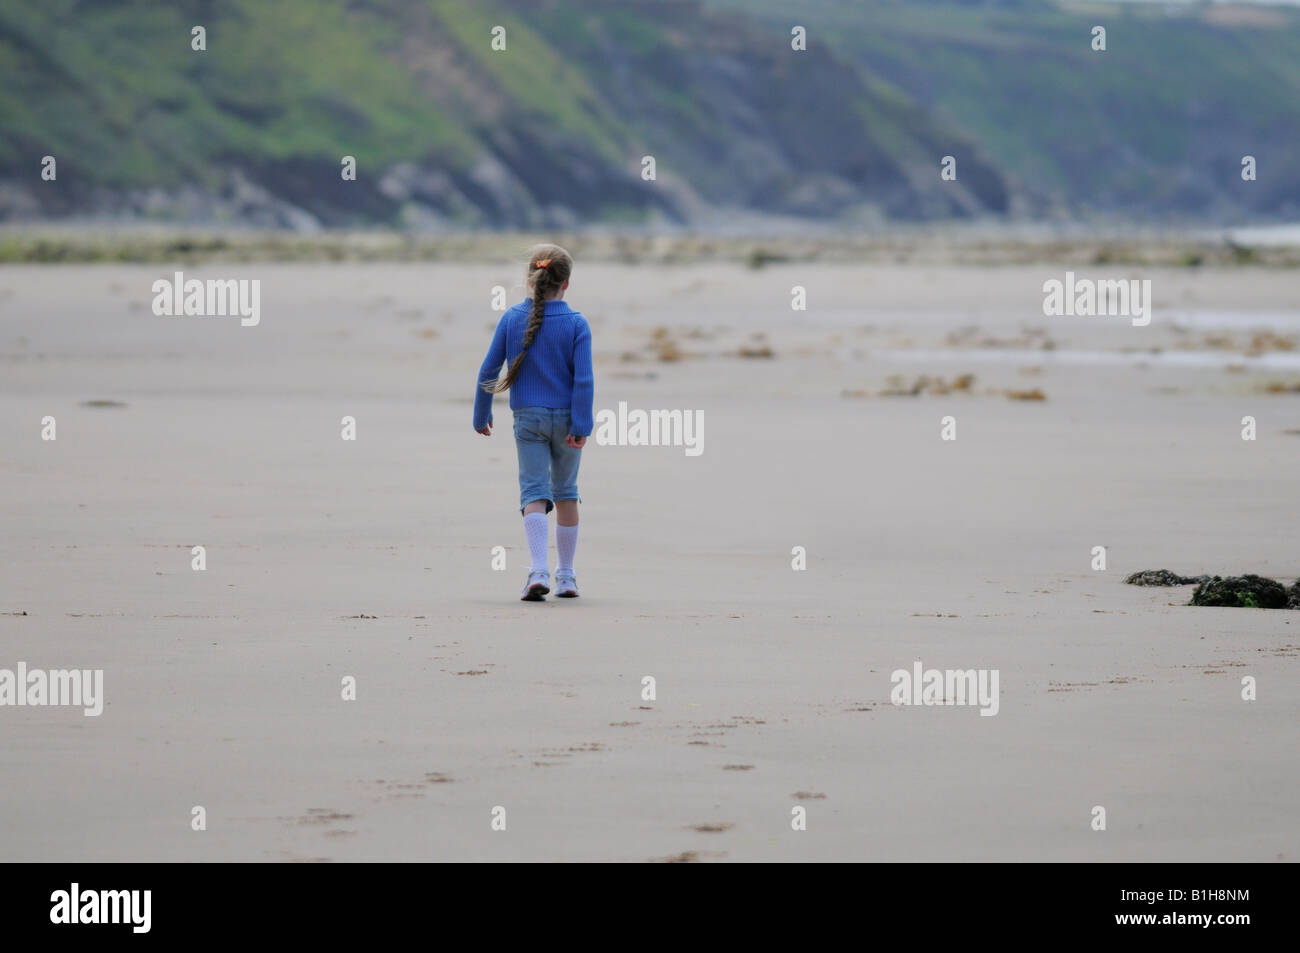 Young girl walking alone on beach Stock Photo